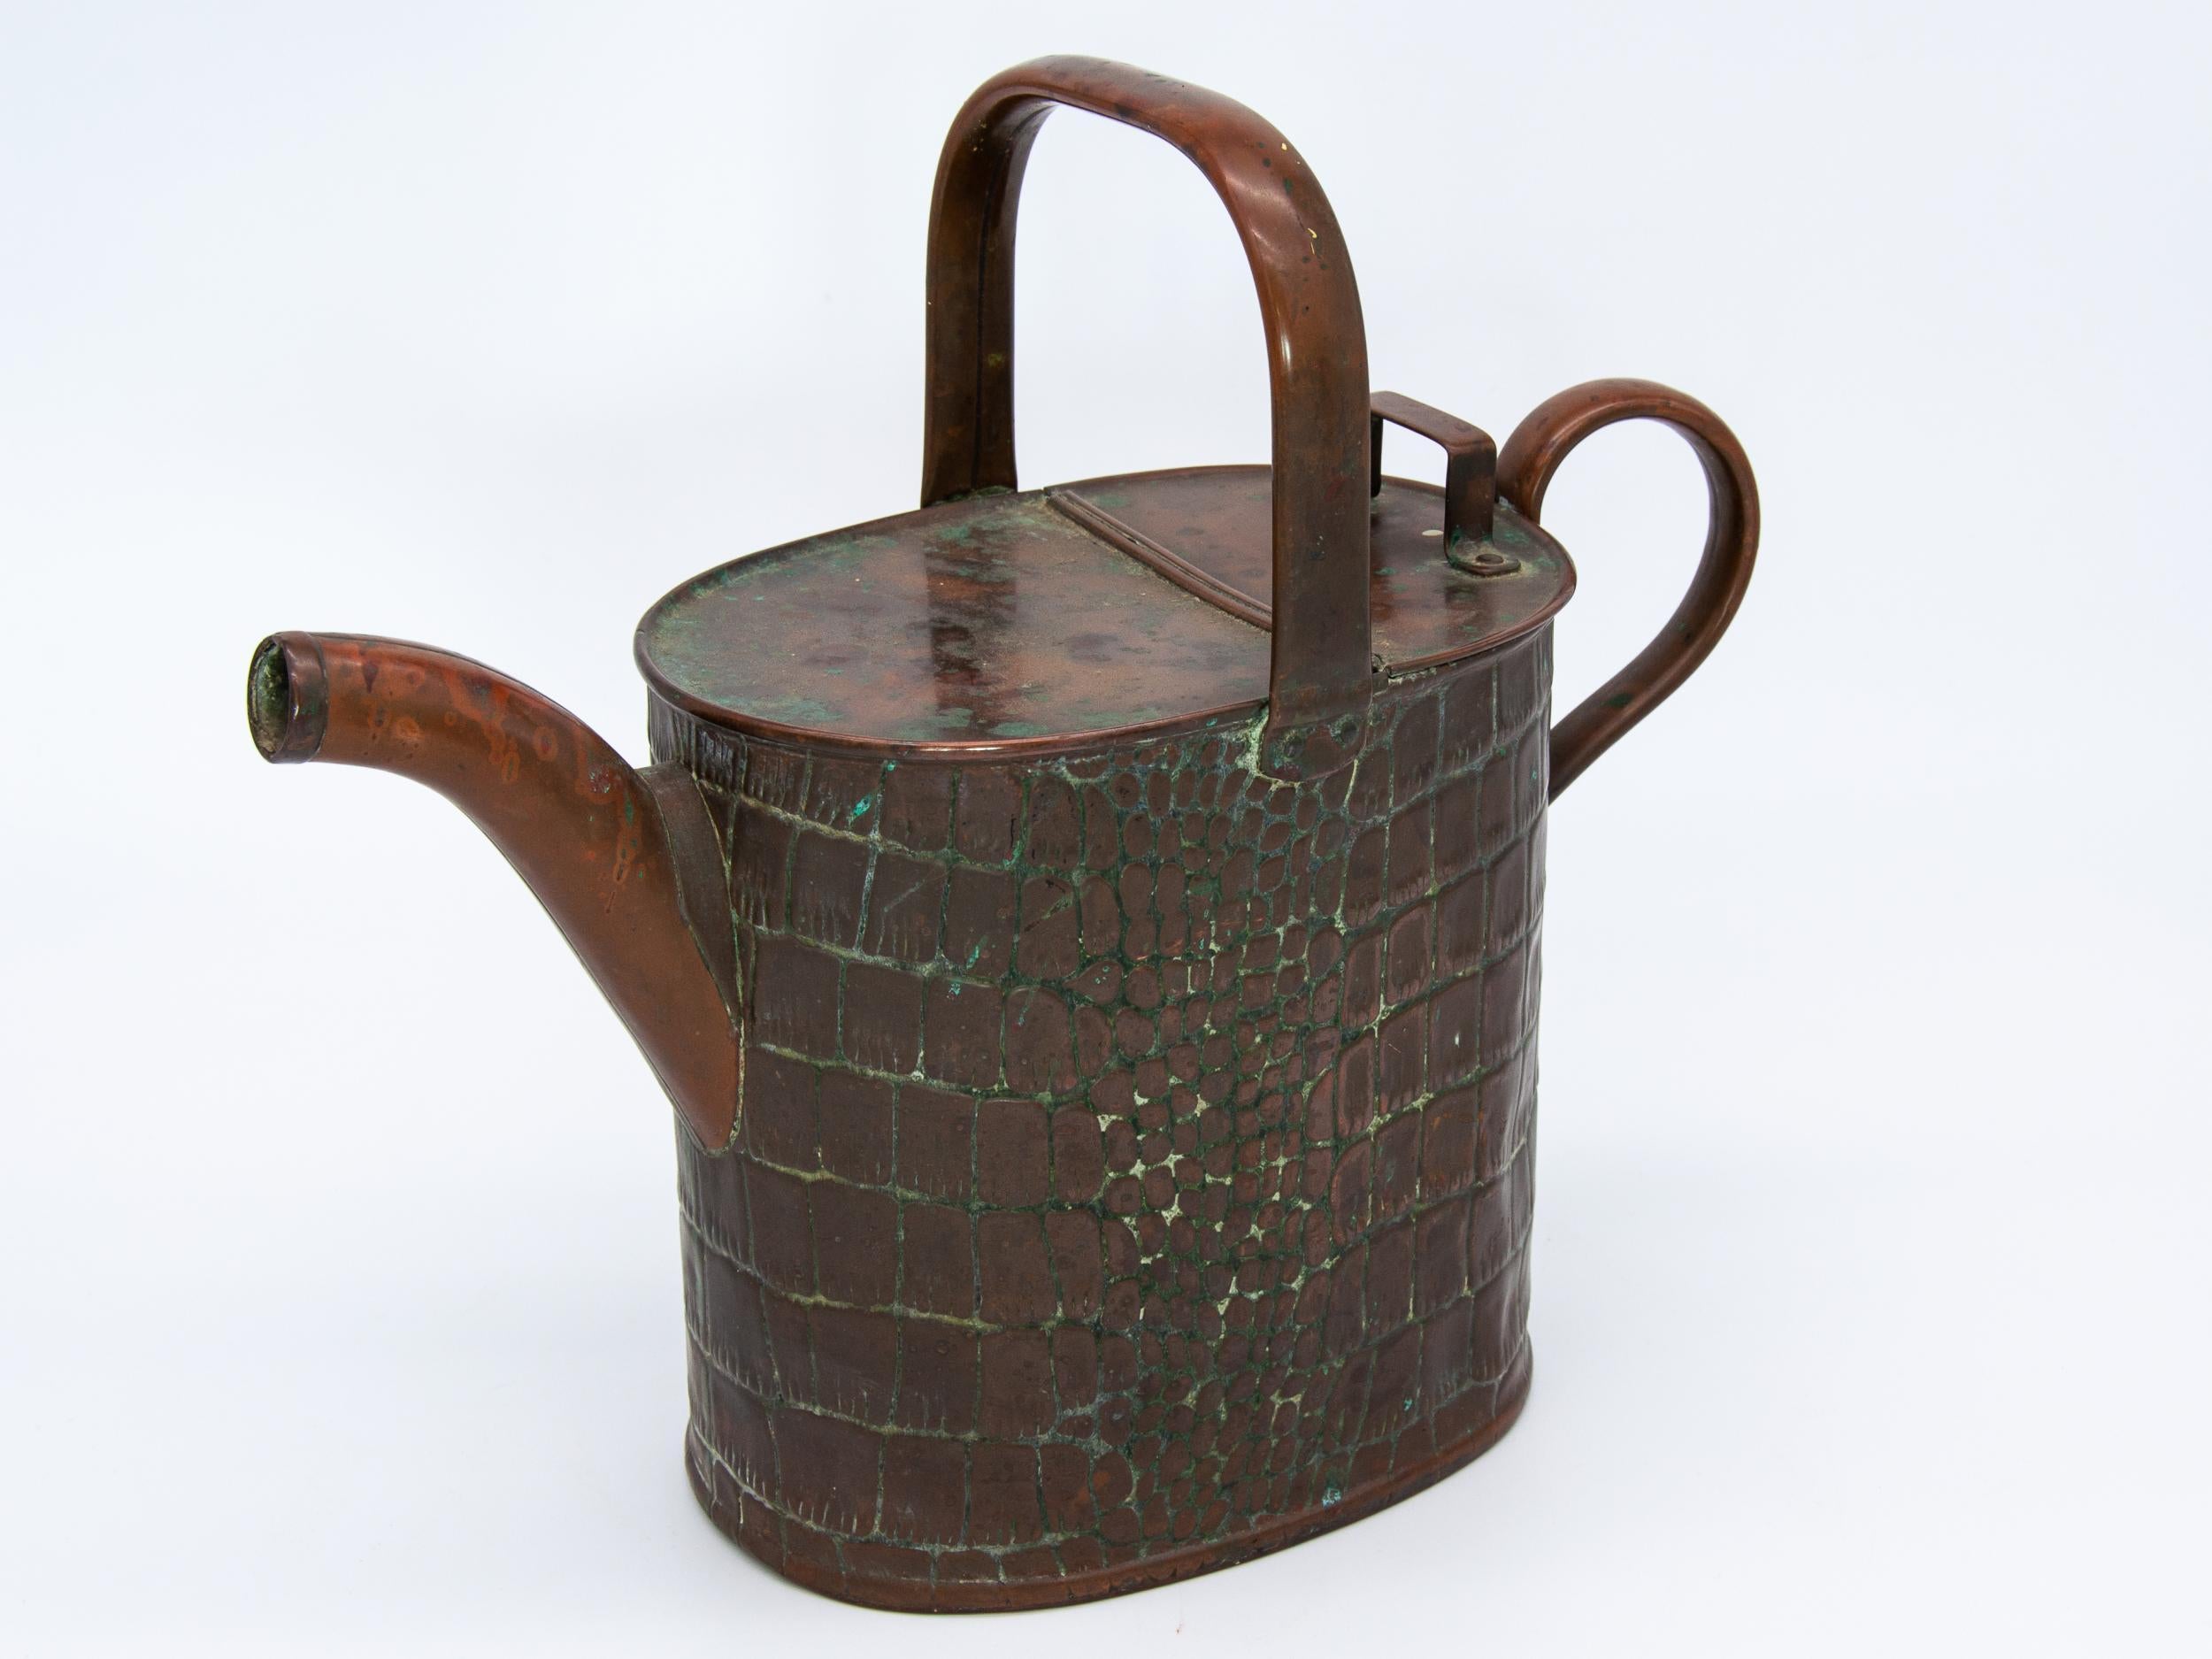 An antique copper watering can from the late 19th century. Desirable verdigris patination on the body.